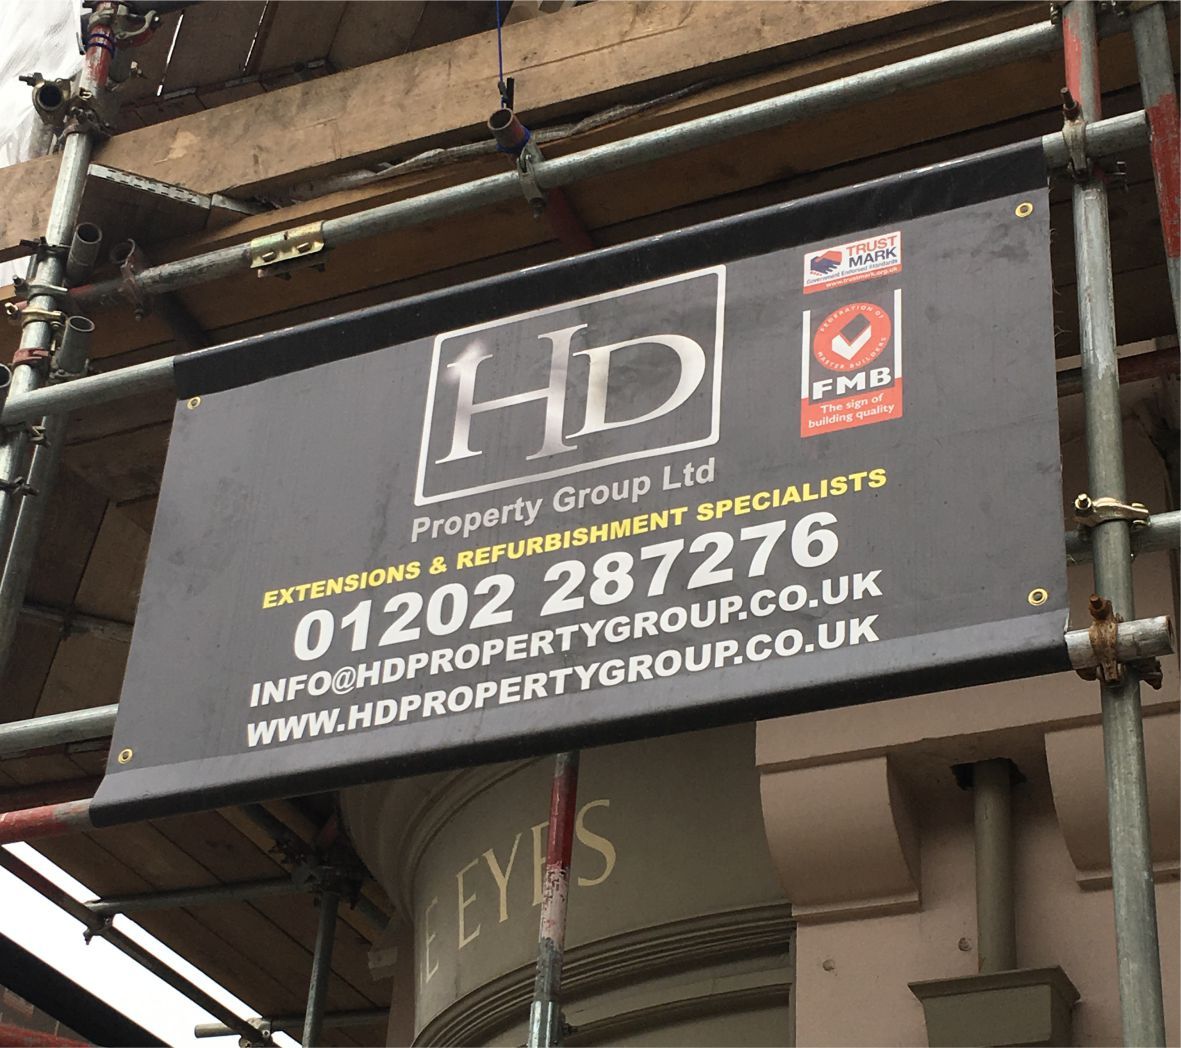 Scaffolding Banners image